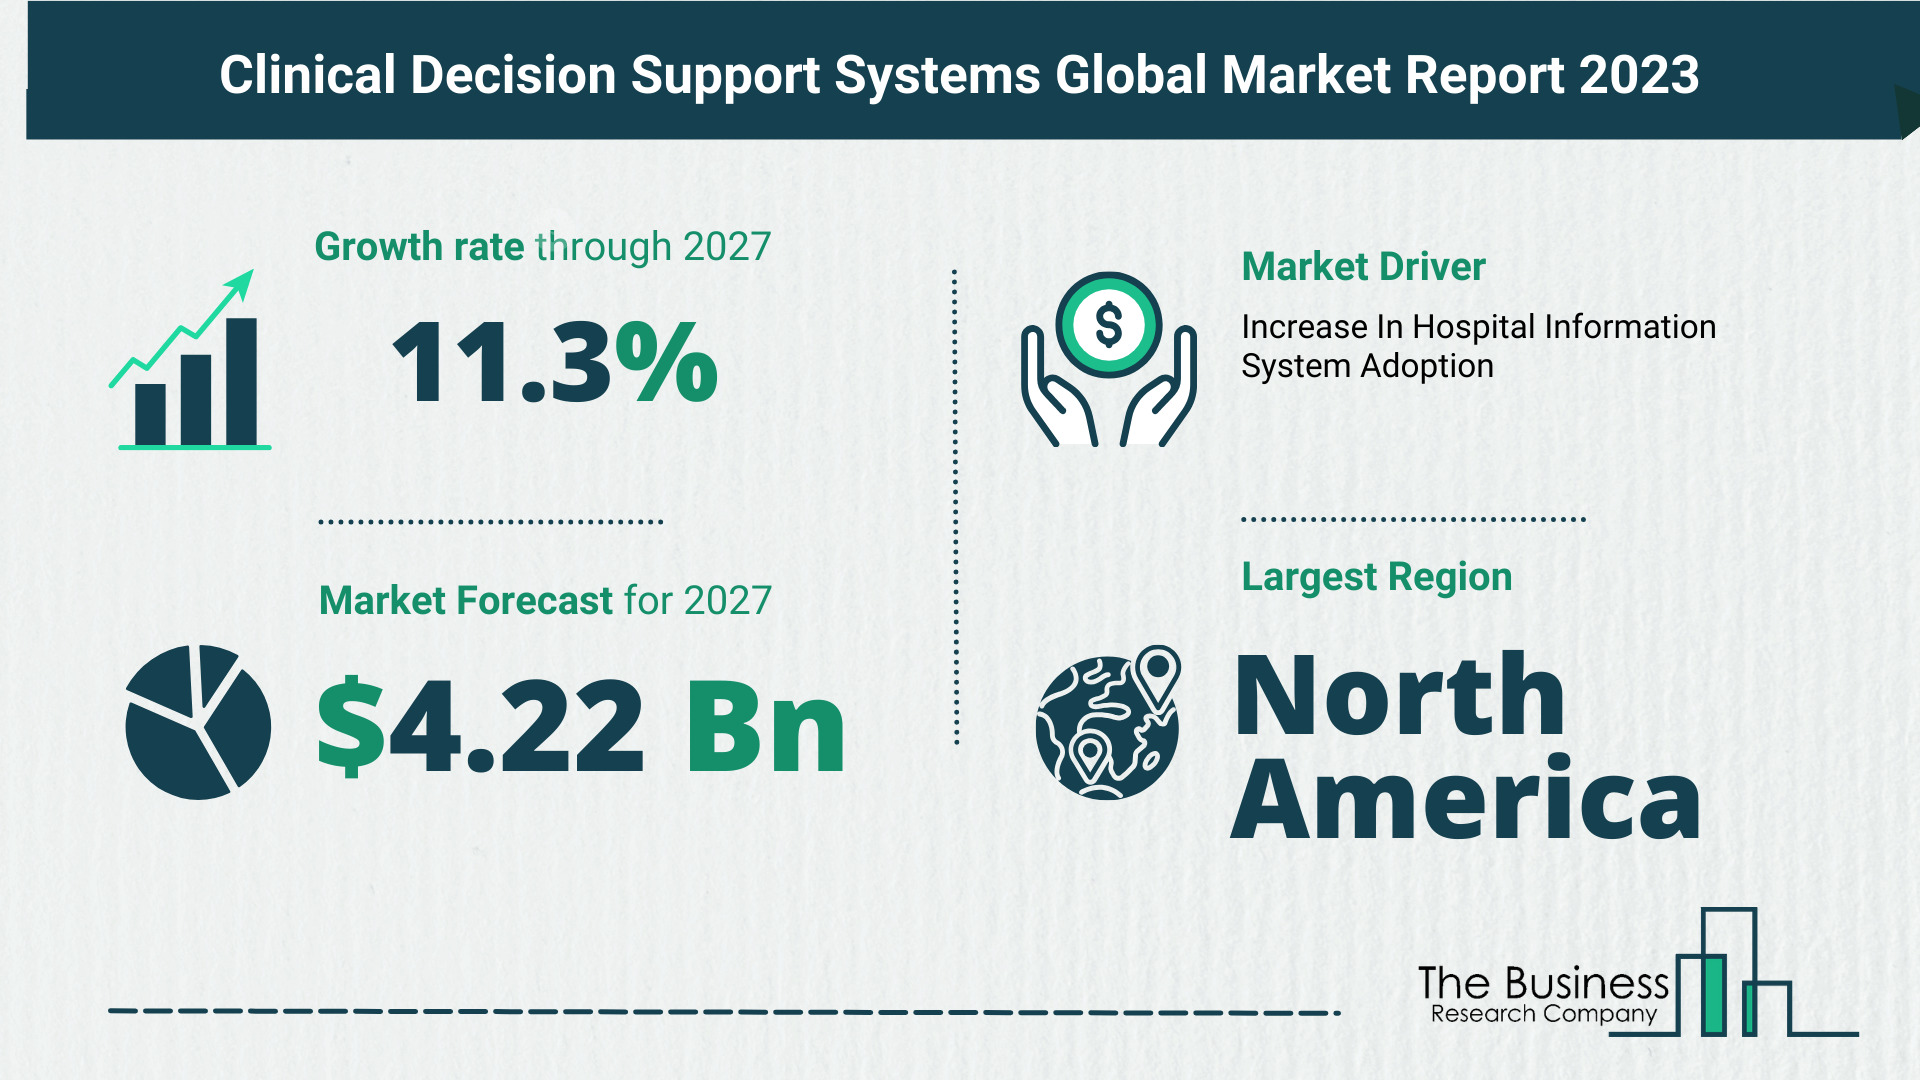 Key Insights On The Clinical Decision Support Systems Market 2023 – Size, Driver, And Major Players